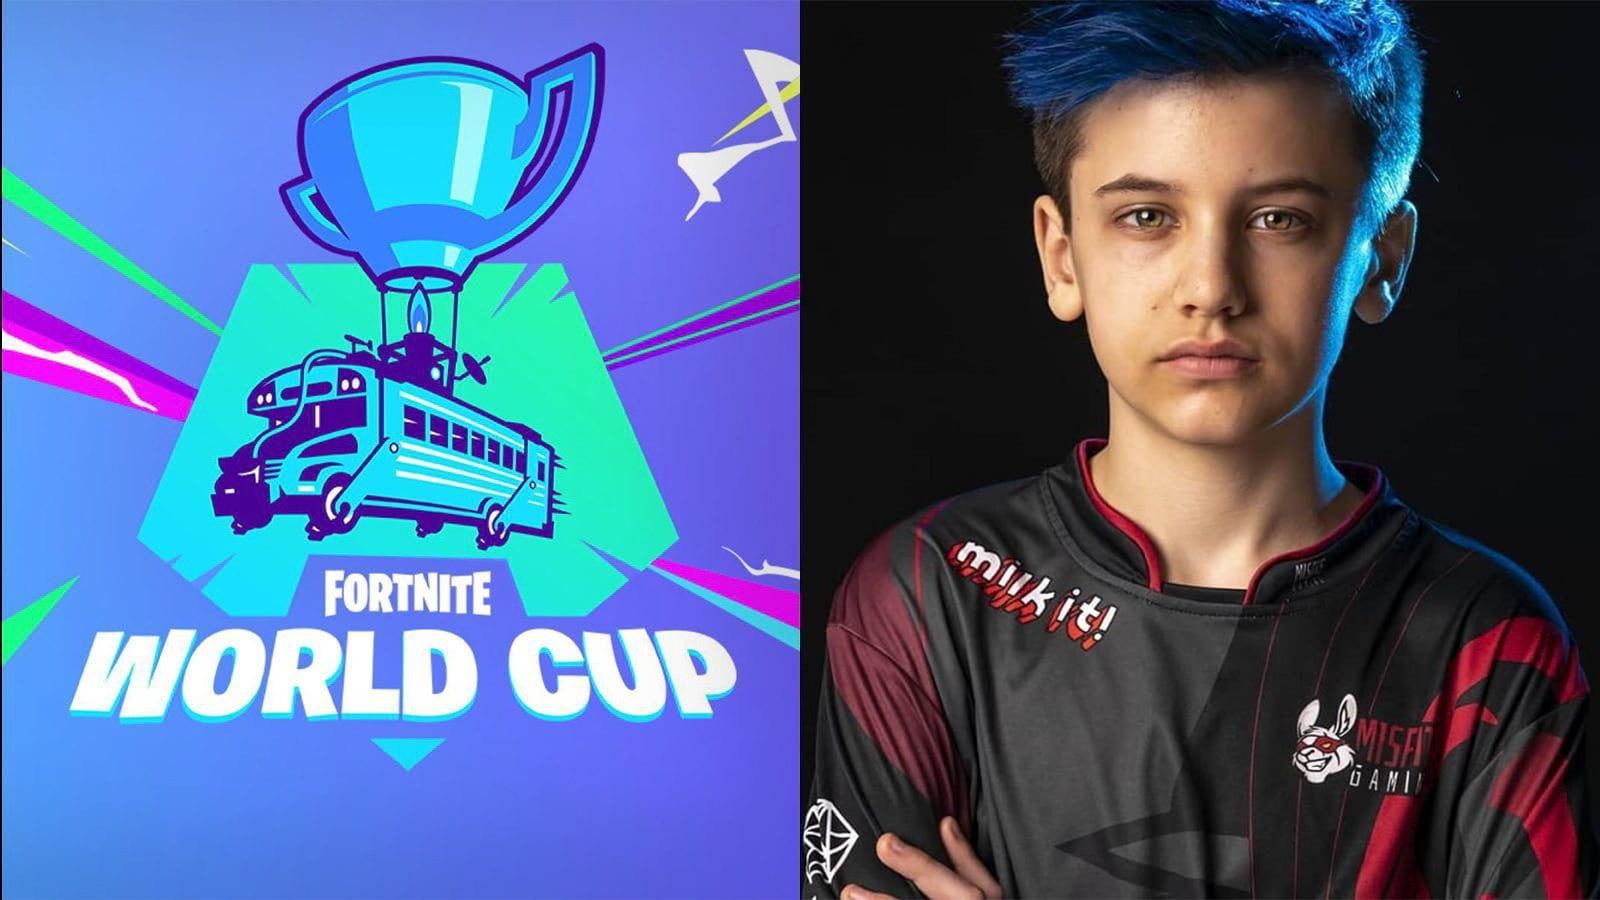 Fortnite World Cup player Sceptic claims he paid shocking amount of taxes on winnings